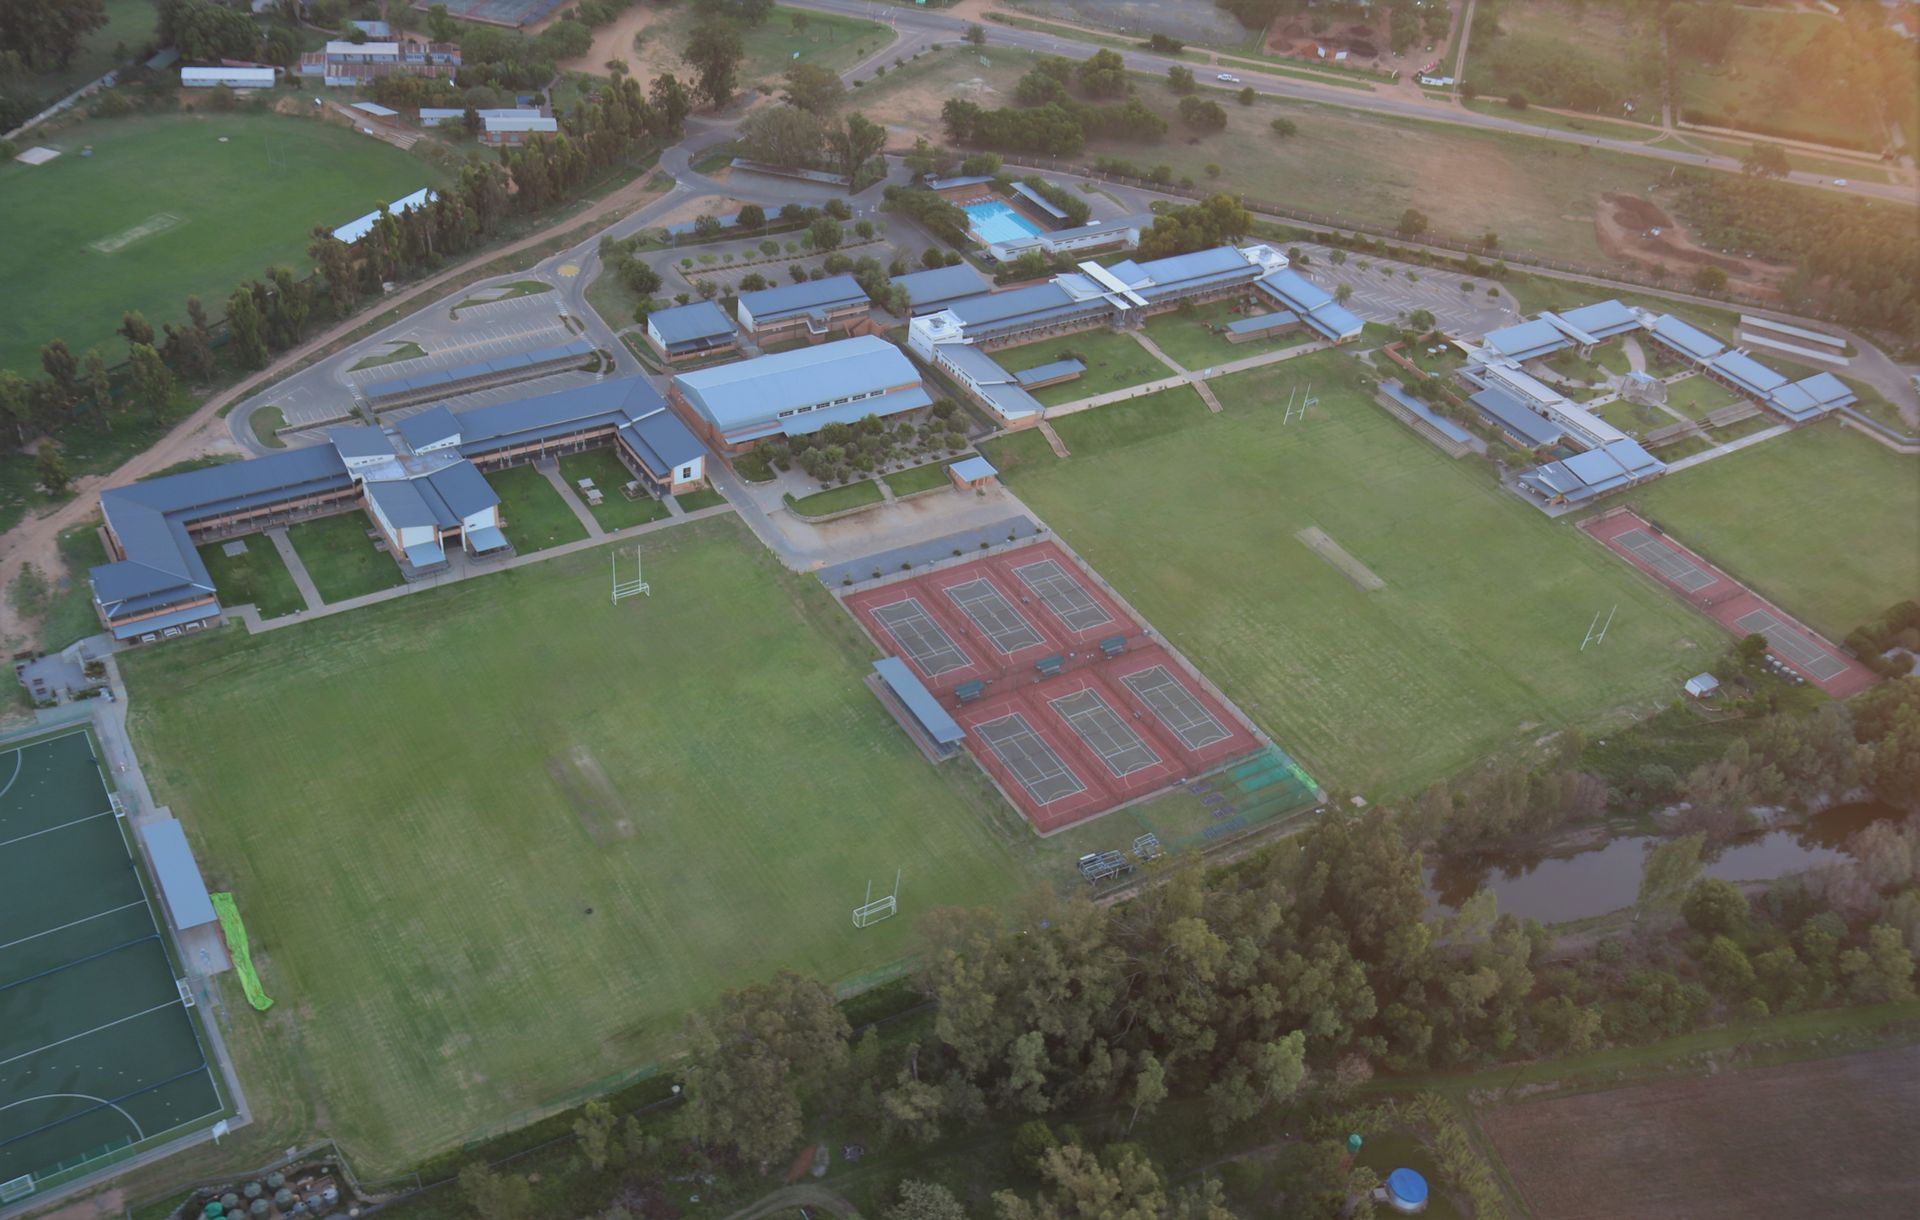 an aerial view of a school with a tennis court and a soccer field .